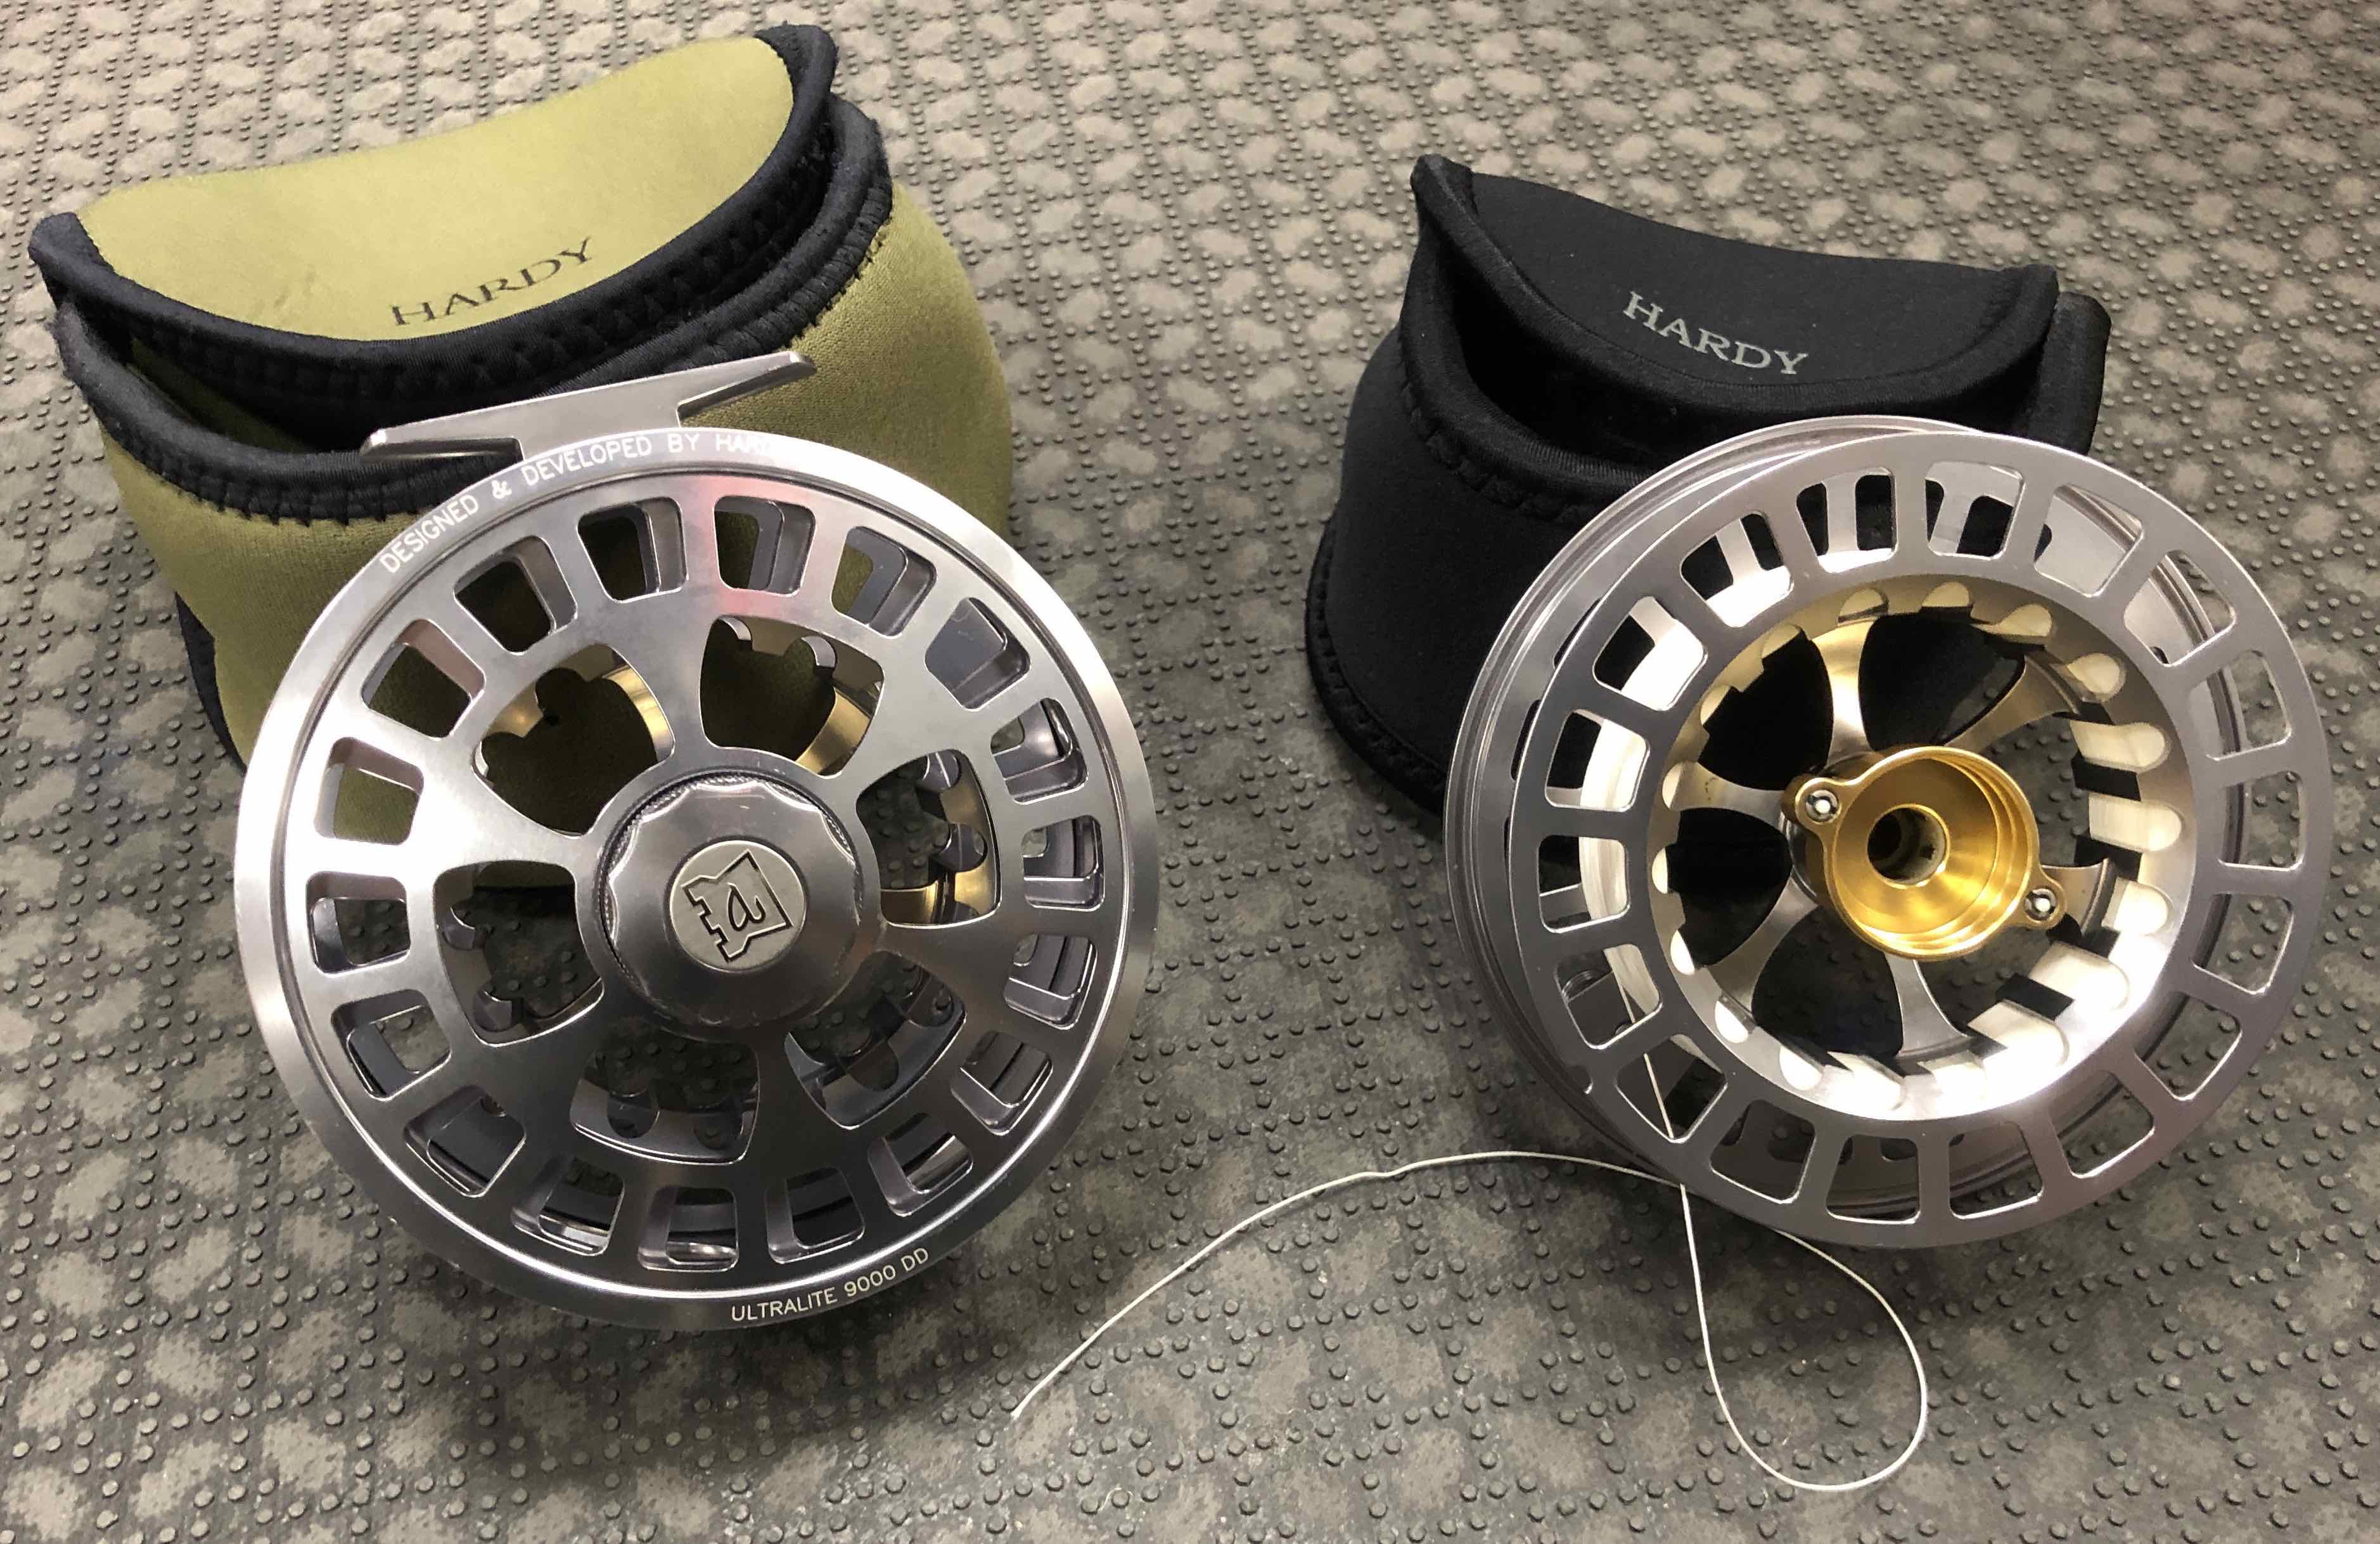 https://thefirstcast.ca/wp-content/uploads/2019/01/Hardy-Ultralite-9000DD-Spey-Sized-Fly-Reel-cw-Spare-Spool-CC.jpg